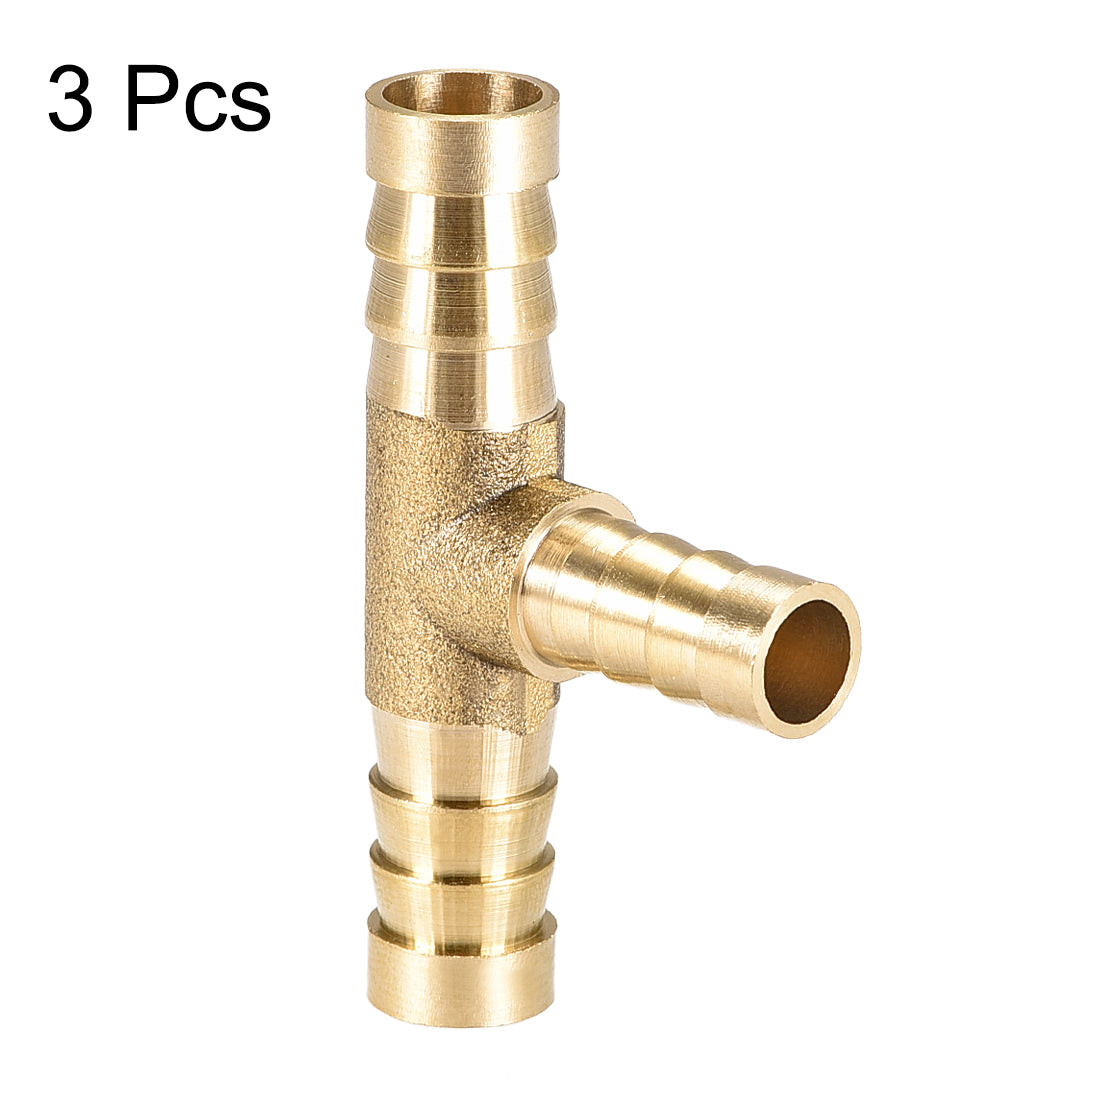 Uxcell Uxcell 12mm x 8mm x 12mm Brass Hose Reducer Barb Fitting Tee T-Shaped 3 Way Barbed Connector Air Water Fuel Gas 3pcs